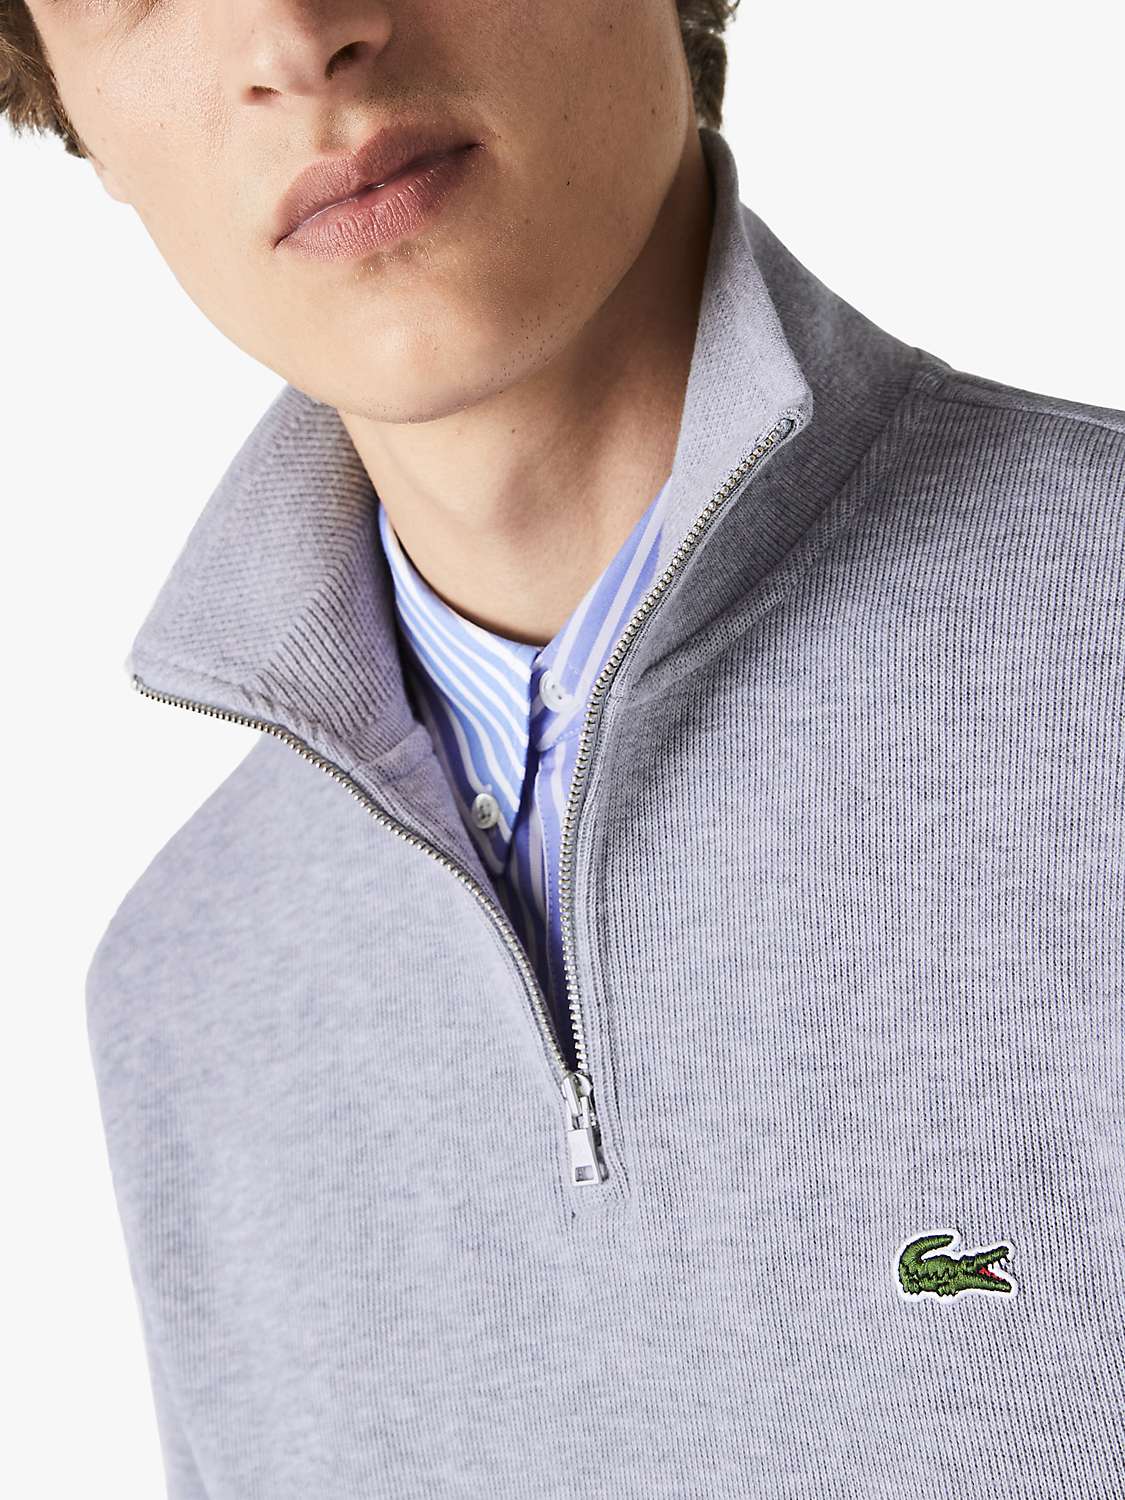 Buy Lacoste 1/4 Zip Jersey Top, Silver Chine Online at johnlewis.com